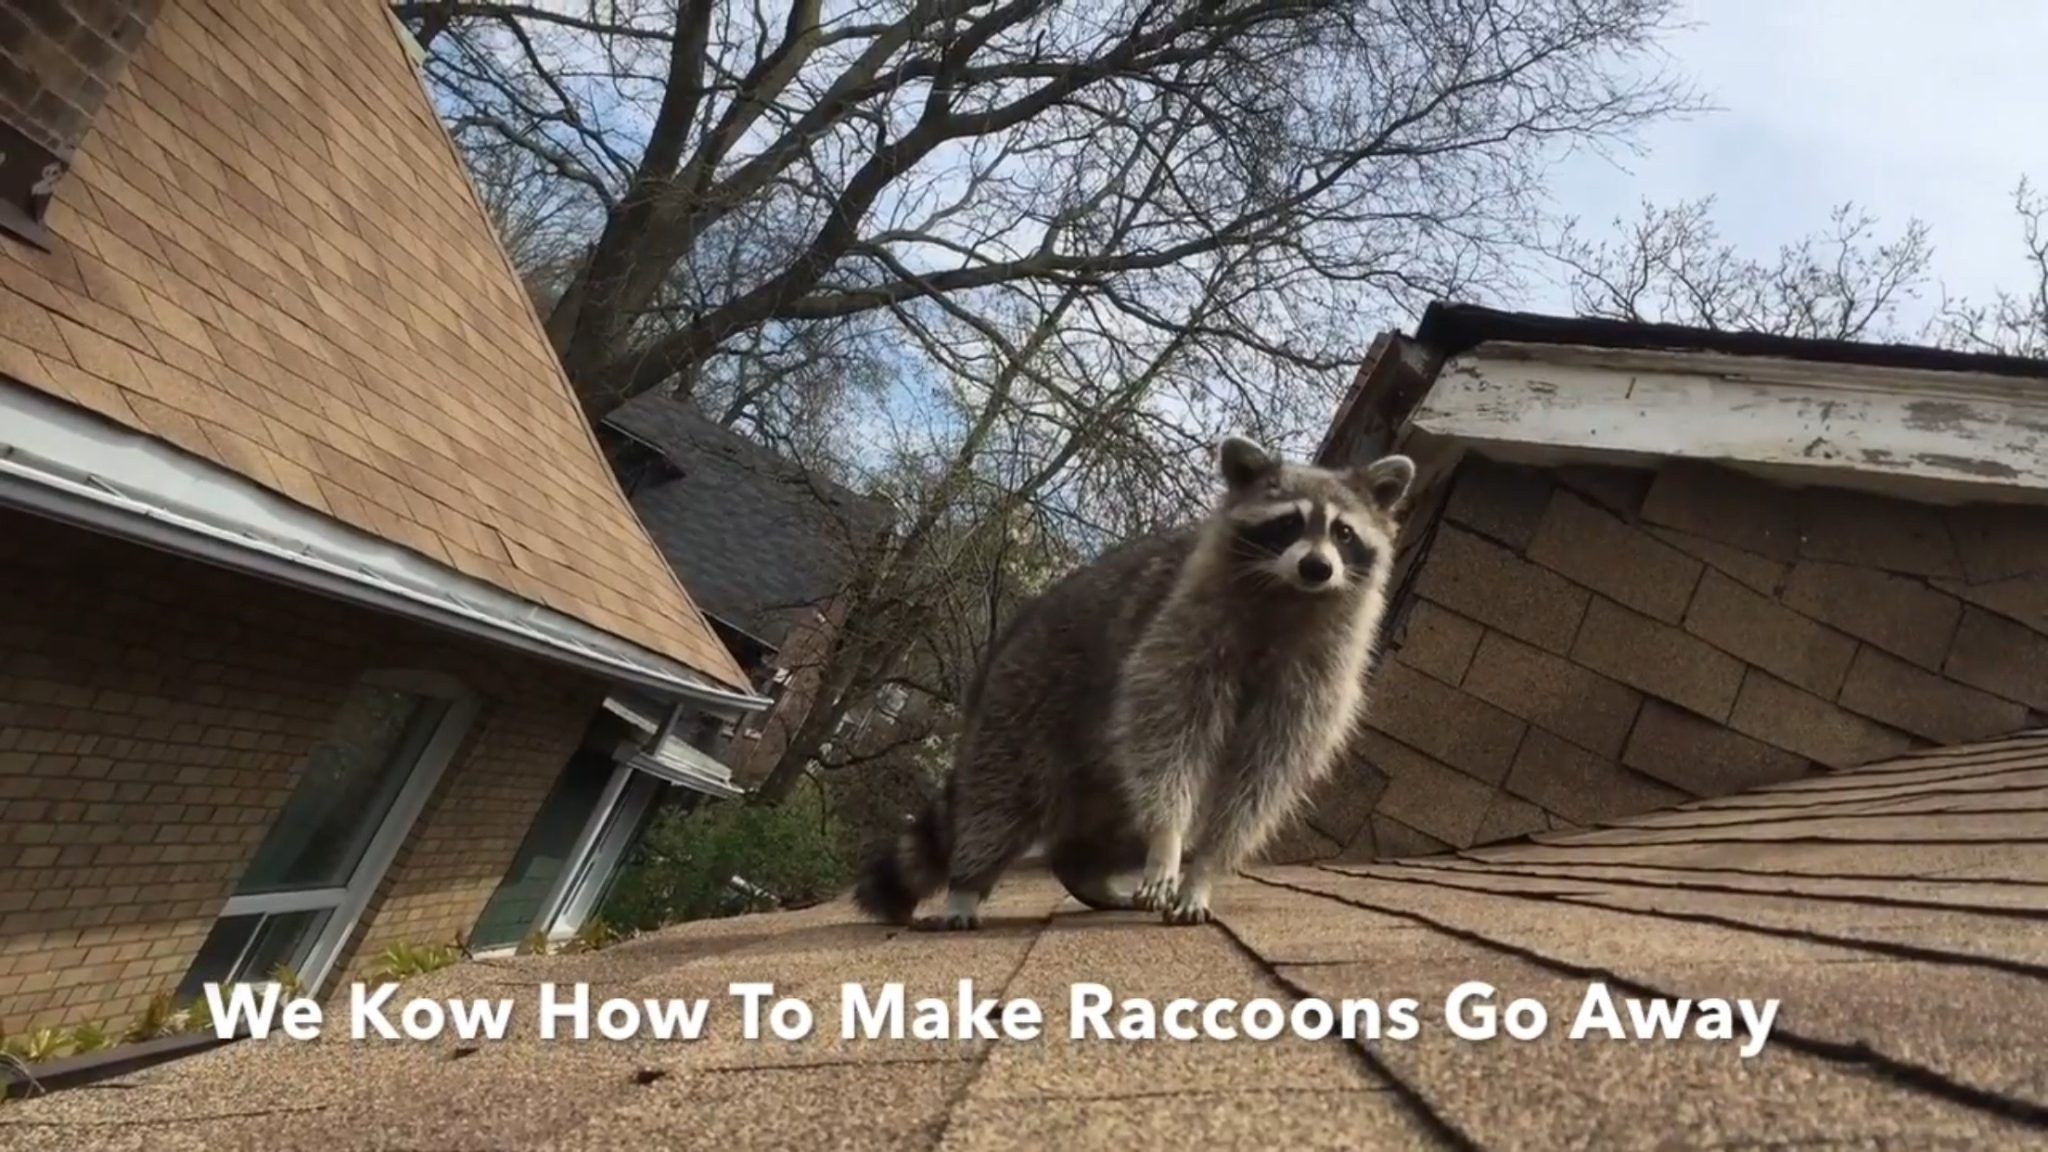 Best Wildlife Control Toronto, Best Squirrel Removal Toronto, Best Raccoon Removal Companies, First-Rate Wildlife Control Toronto, Leading Animal Removal Company